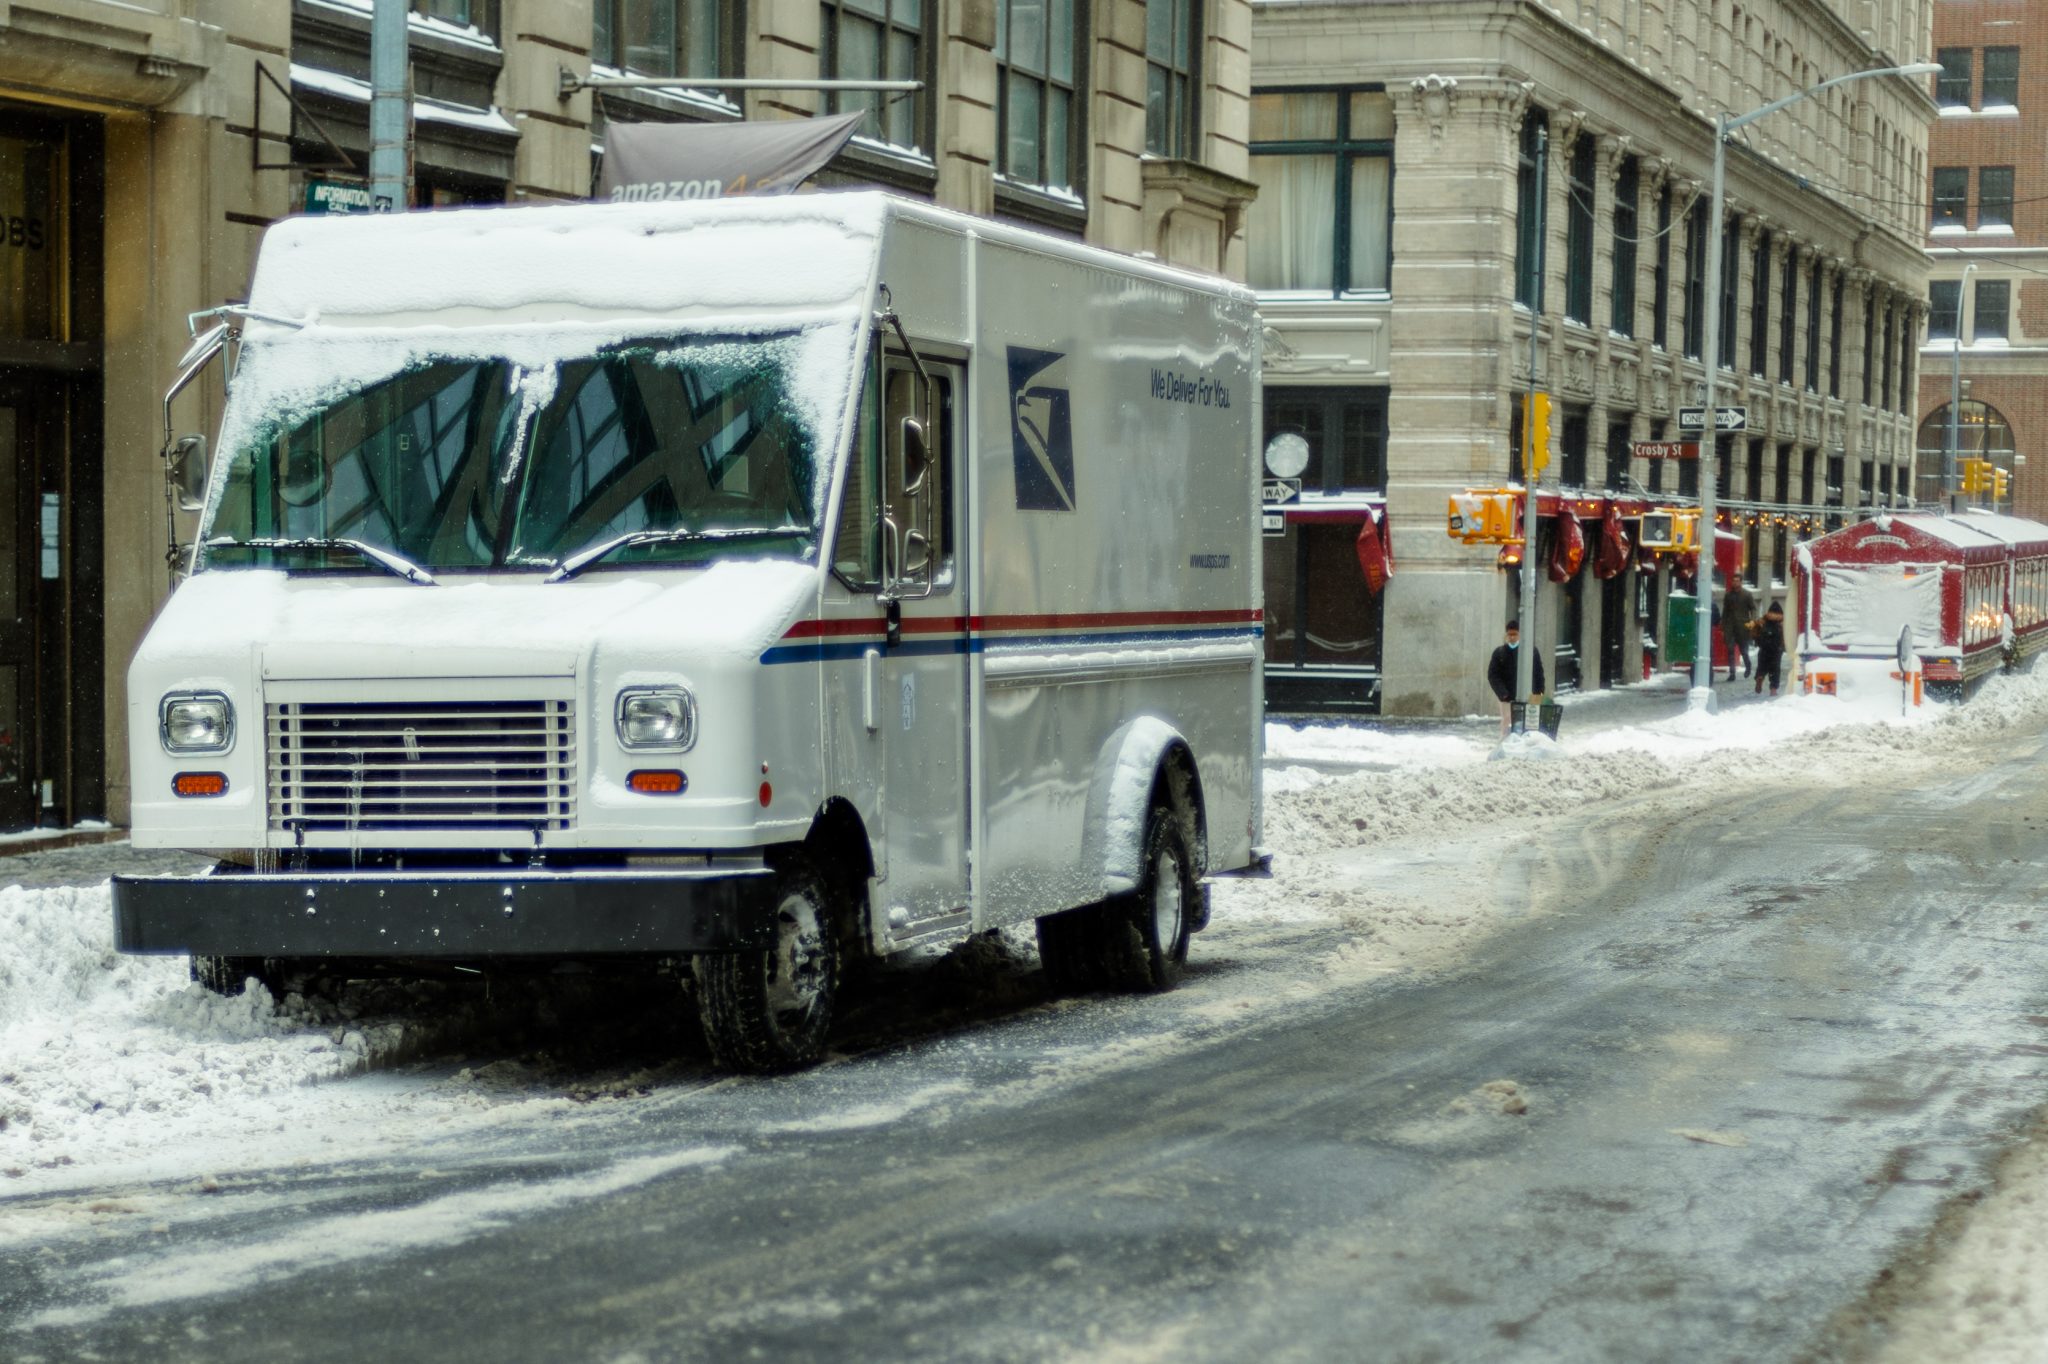 Mail Truck on a snowy NYC street